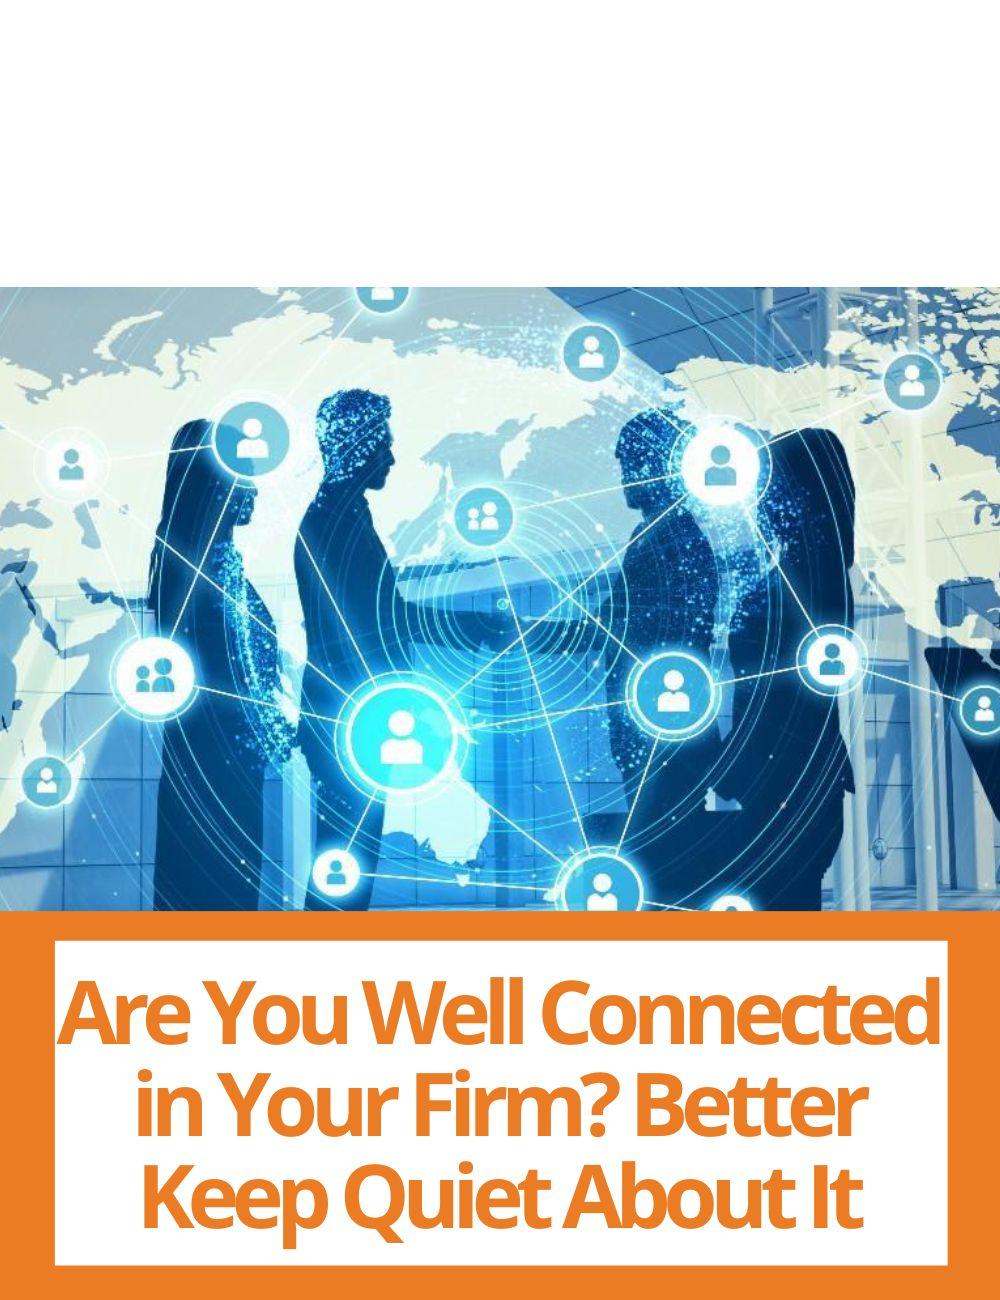 Link to related stories. Image: a network of people. Story headline: Are You Well Connected in Your Firm? Better Keep Quiet About It